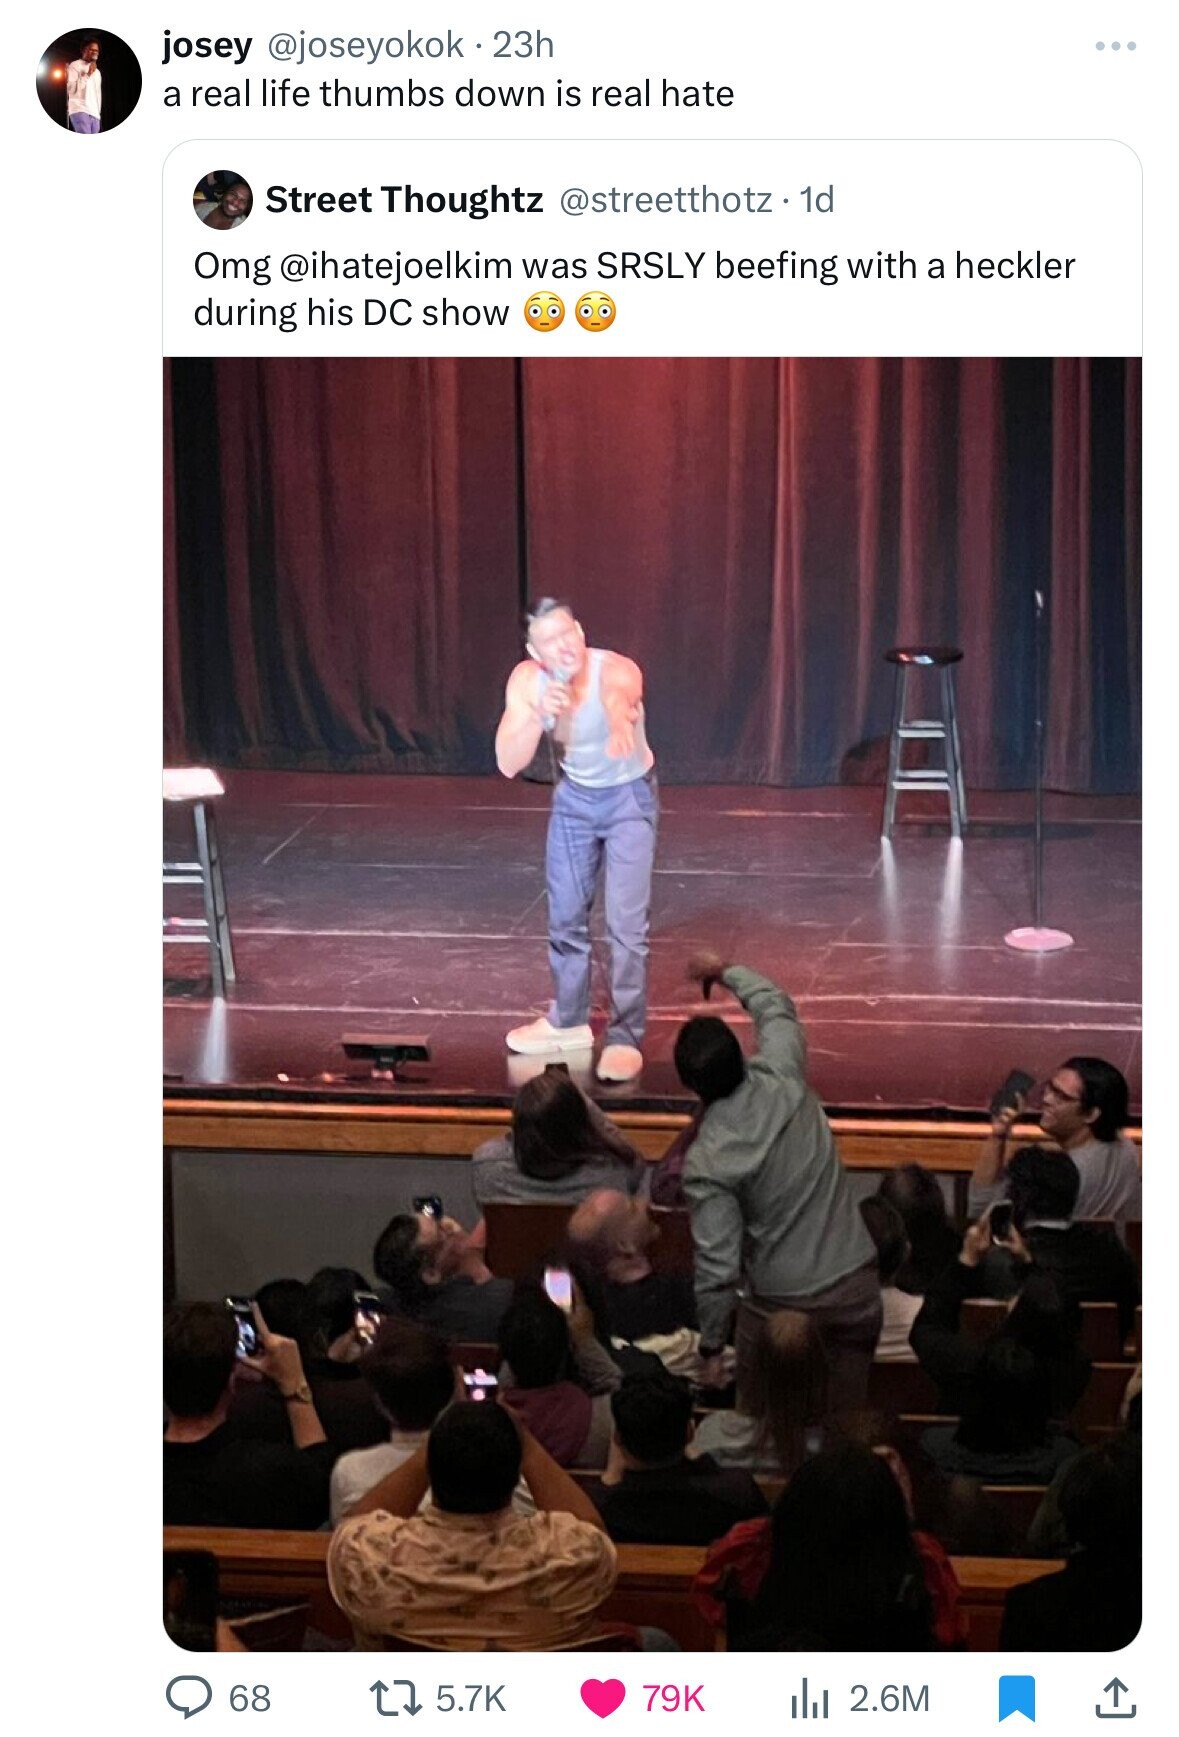 josey @joseyokok.23h a real life thumbs down is real hate Street Thoughtz @streetthotz. 1d Omg @ihatejoelkim was SRSLY beefing with a heckler during his DC show 68 5.7K 79K 2.6M 